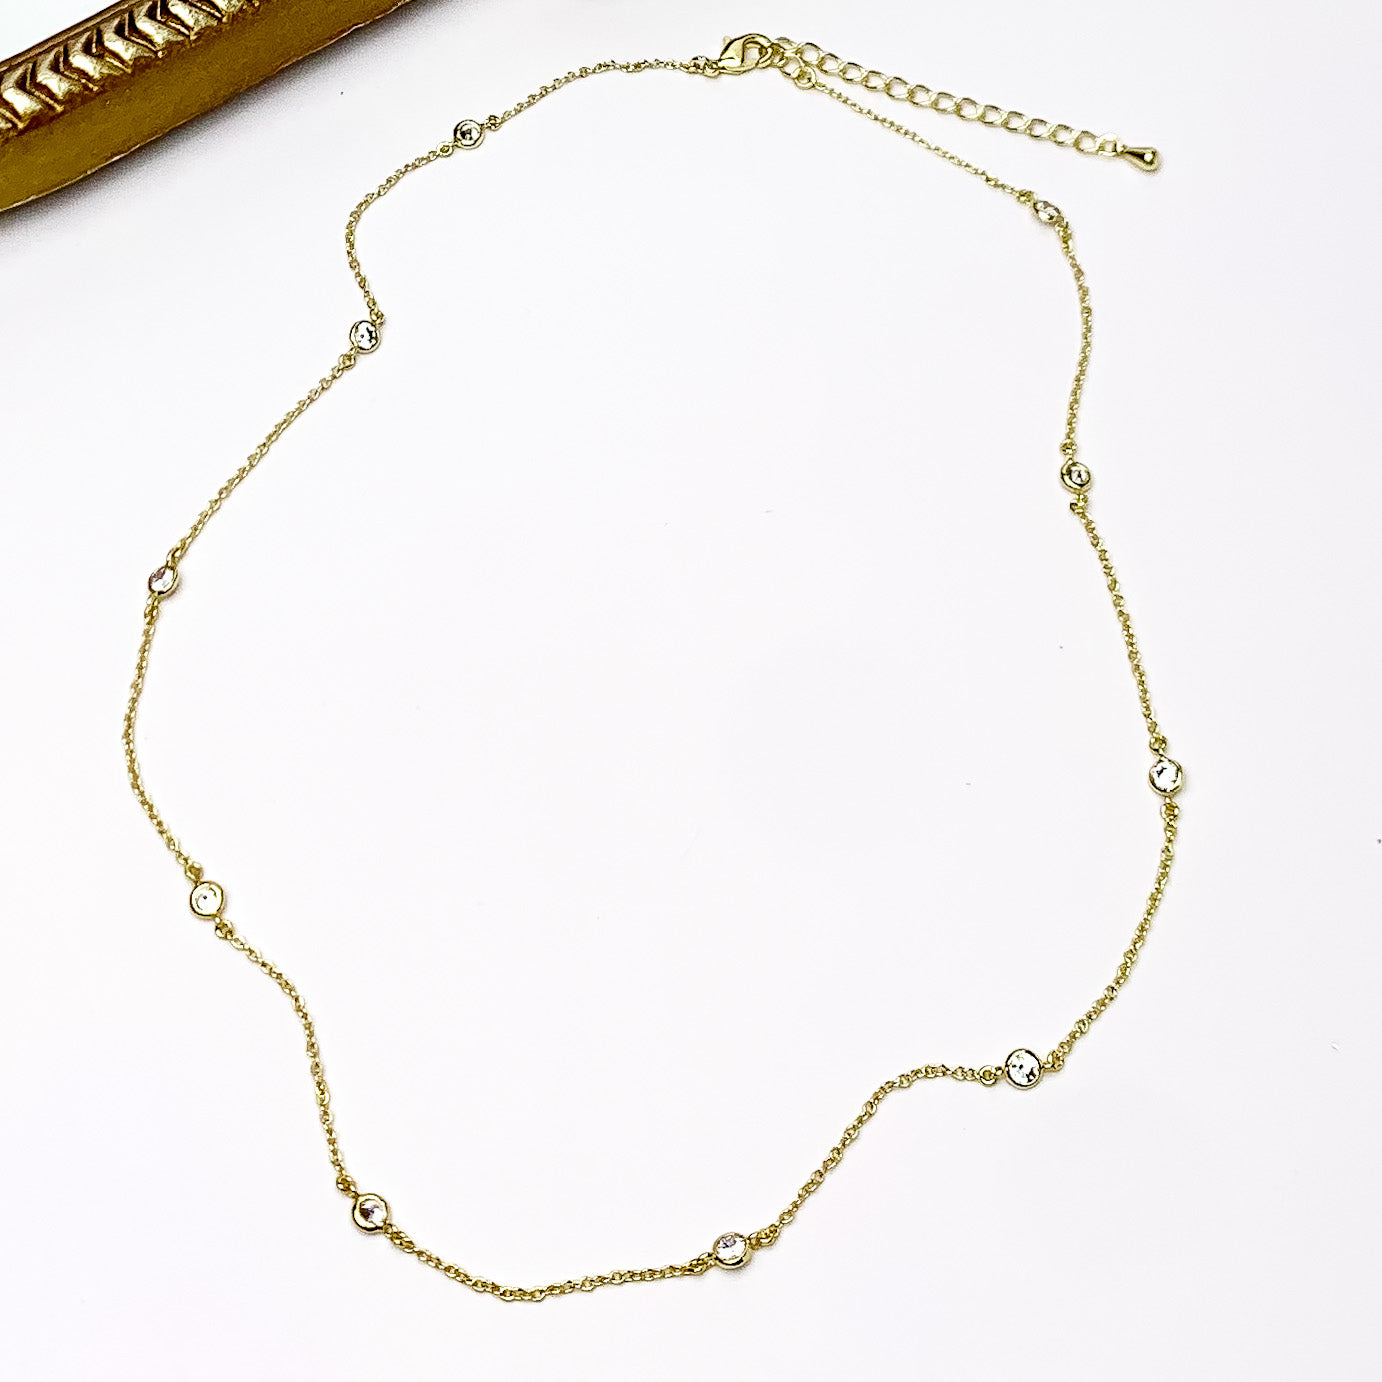 Simple Gold Tone Necklace With Clear Crystals. Pictured on a white background with a gold frame in the top left corner.